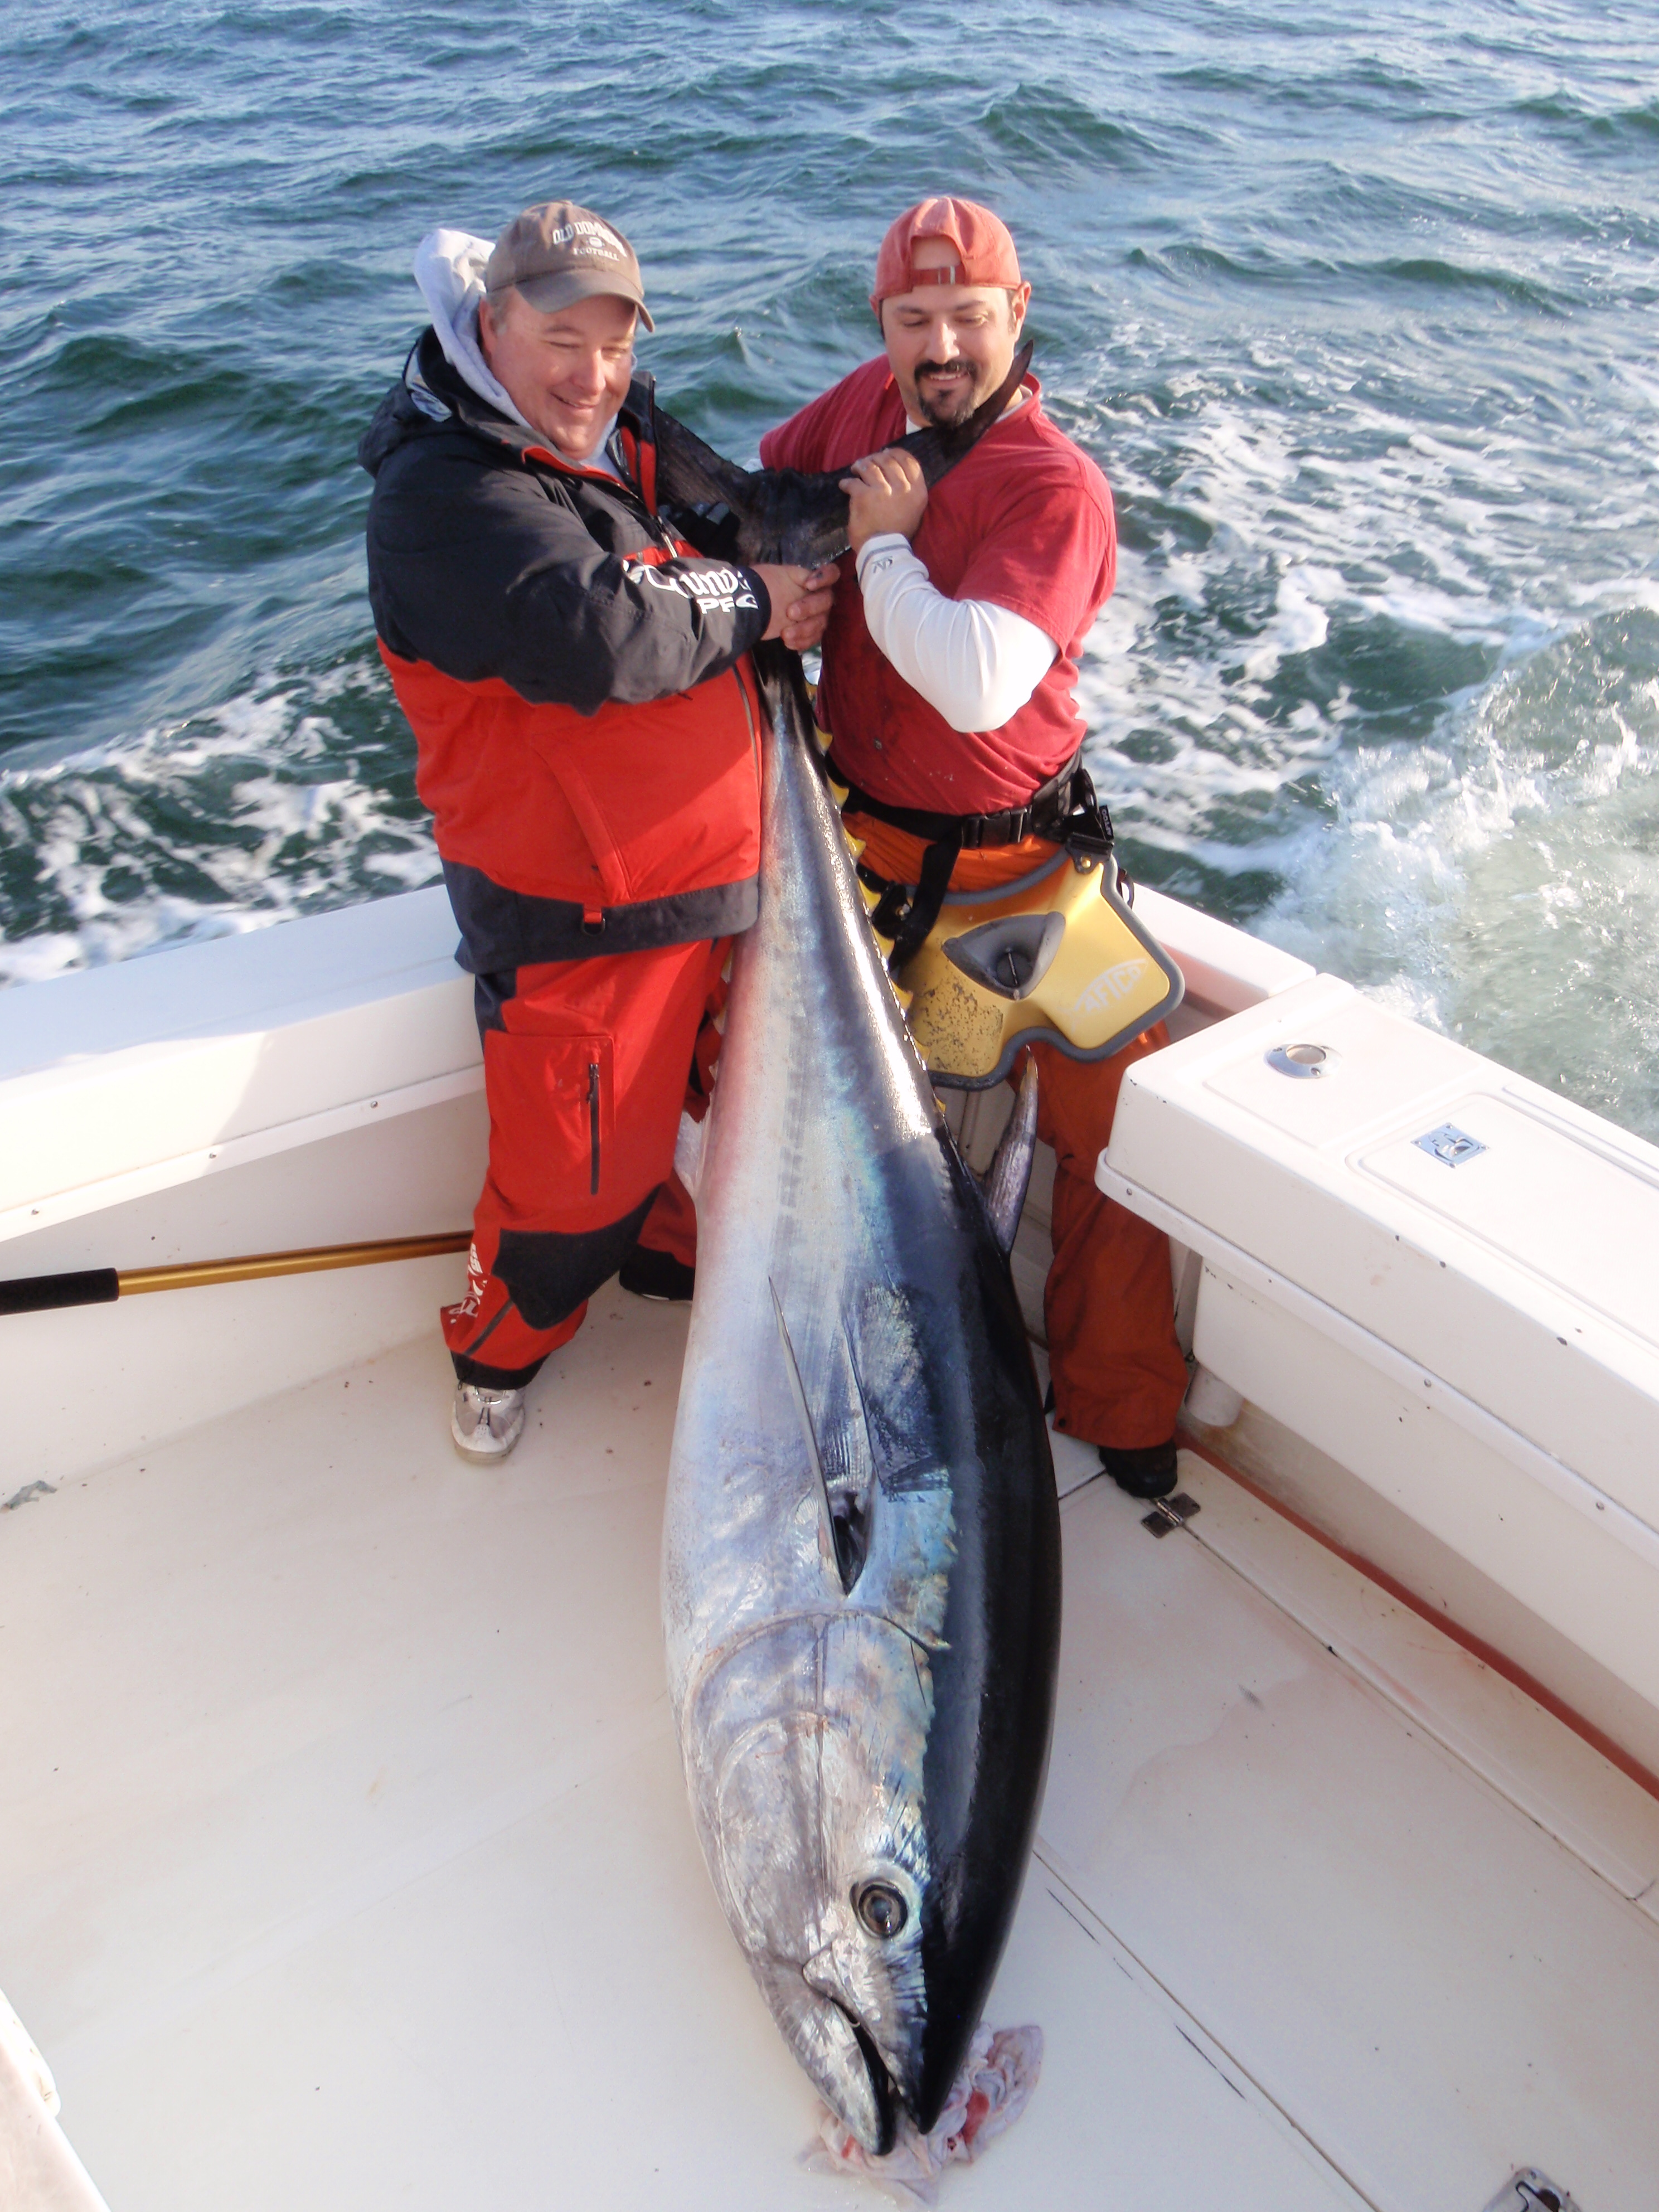 Bluefin Tuna and Yellowtail are Included in the January Fishing